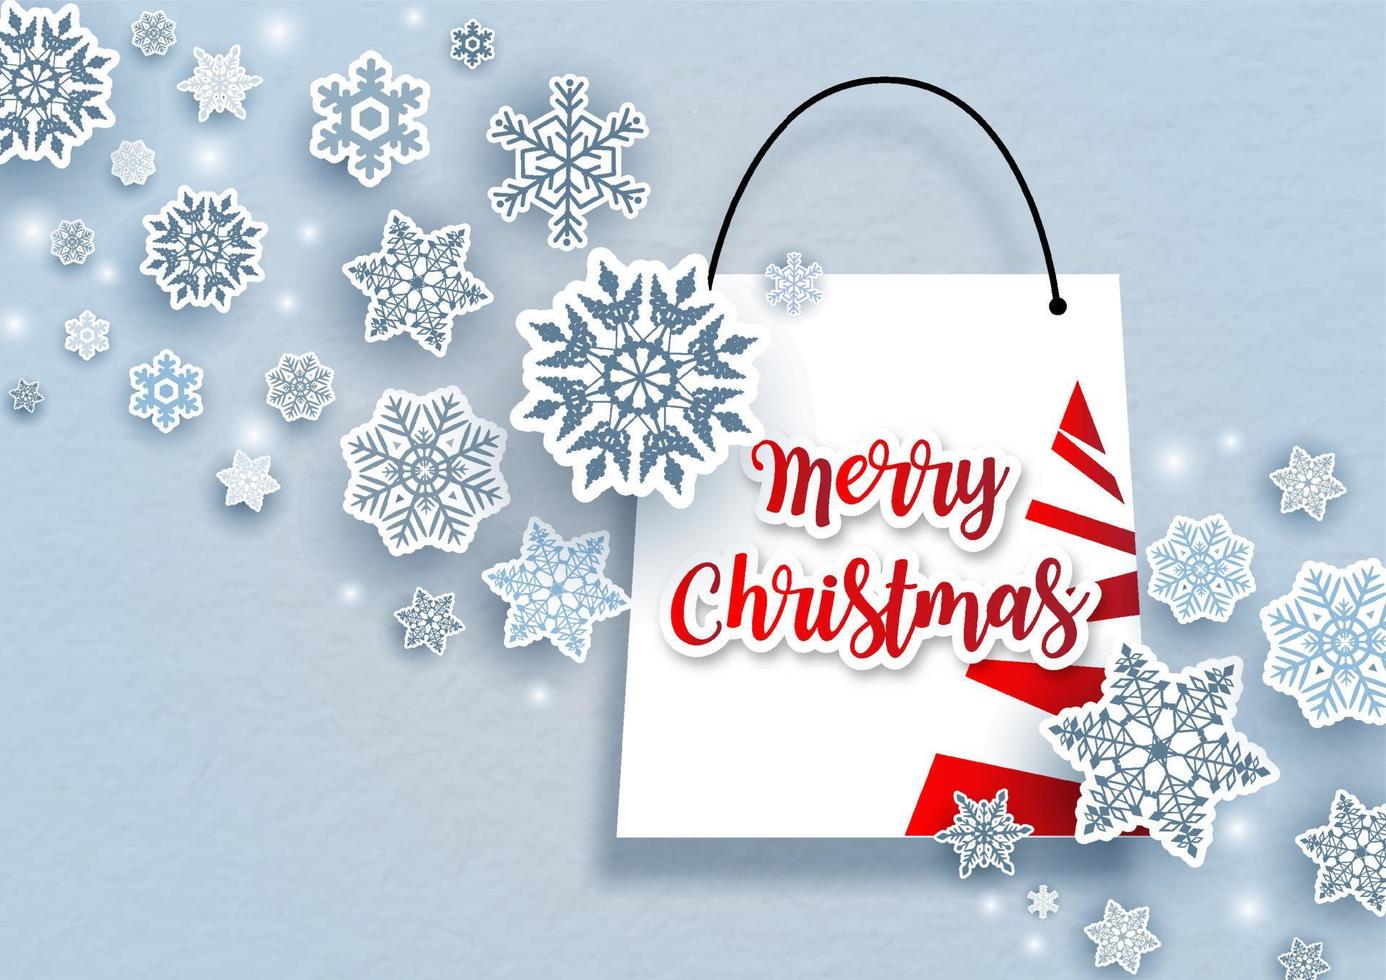 Many and variety snowflake in paper cut style with Merry Christmas lettering on white shopping bag and blue background. Christmas greeting card and poster in vector design.